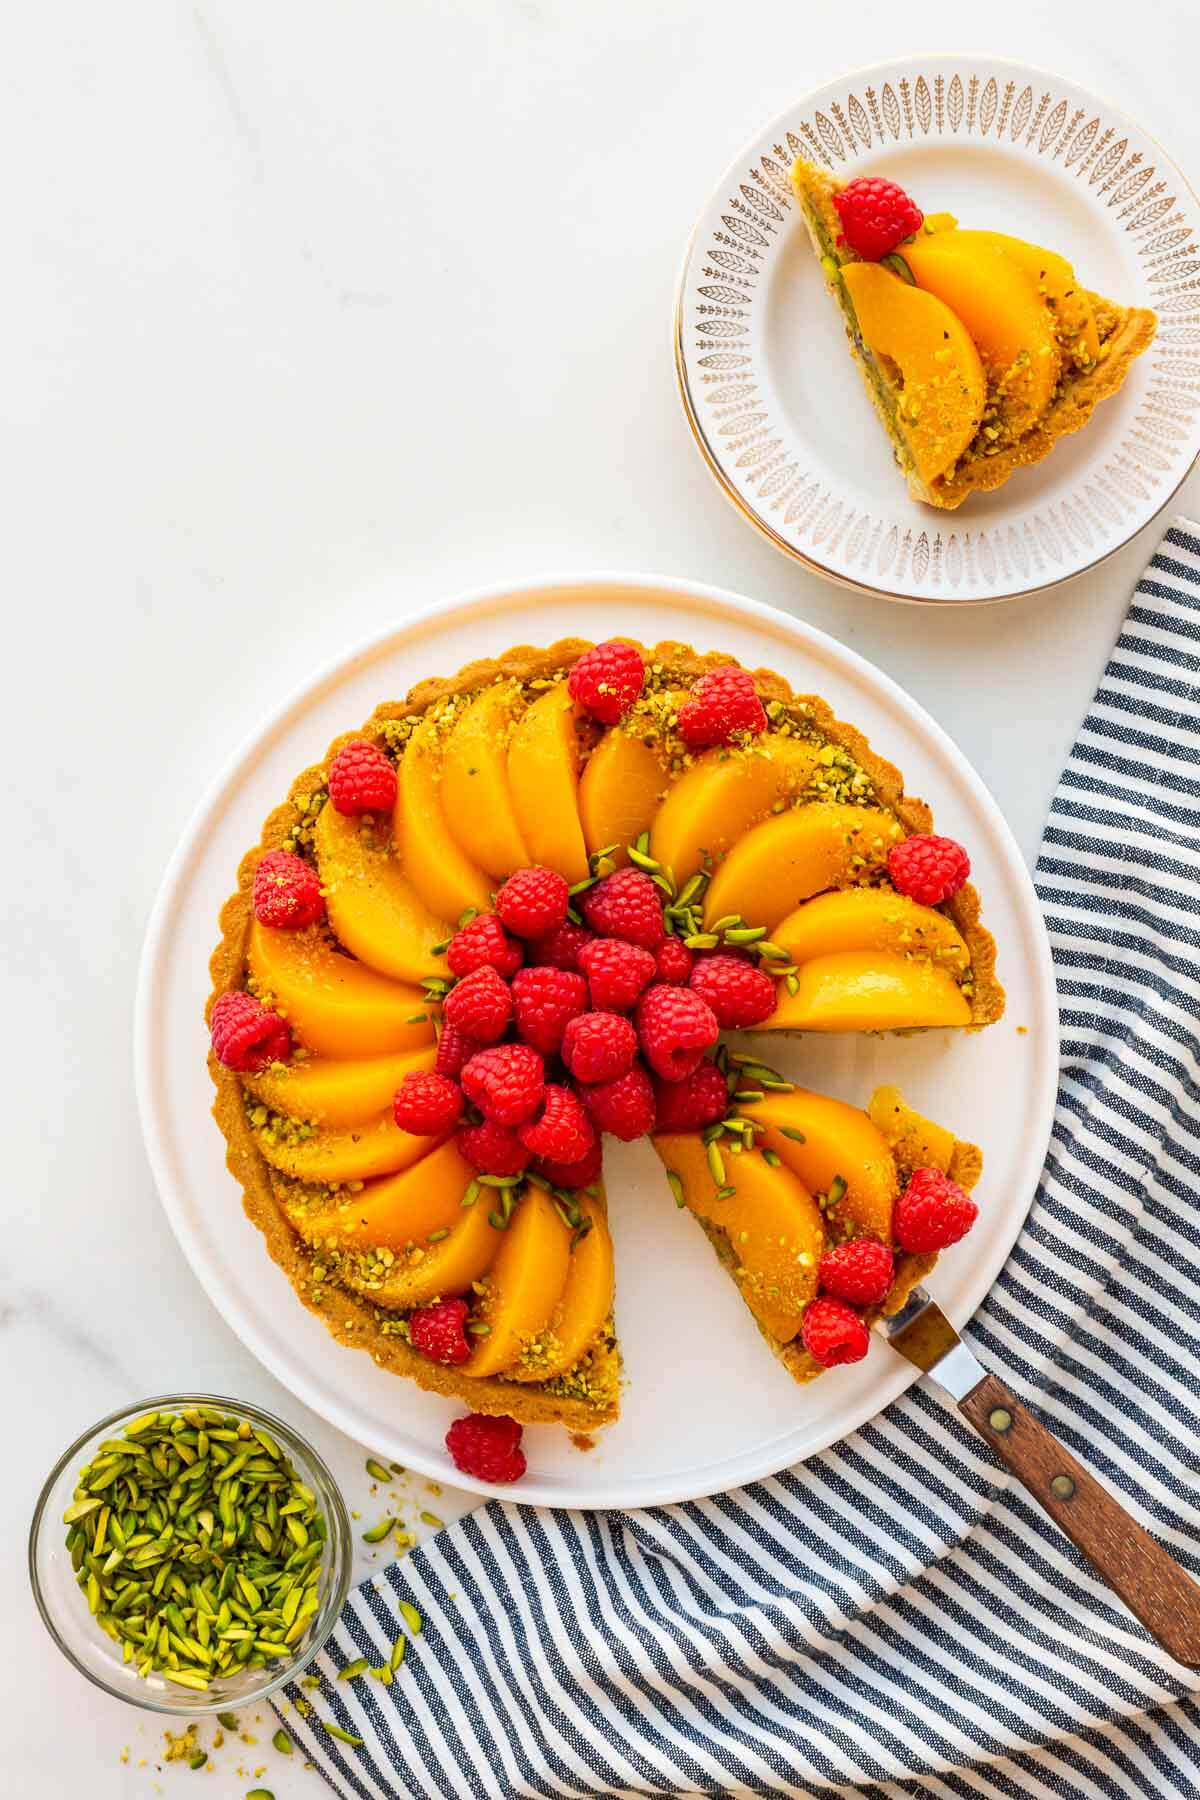 Slicing and serving a pistachio tart topped with sliced peaches and fresh raspberries, and decorated with slivered and ground green pistachios.